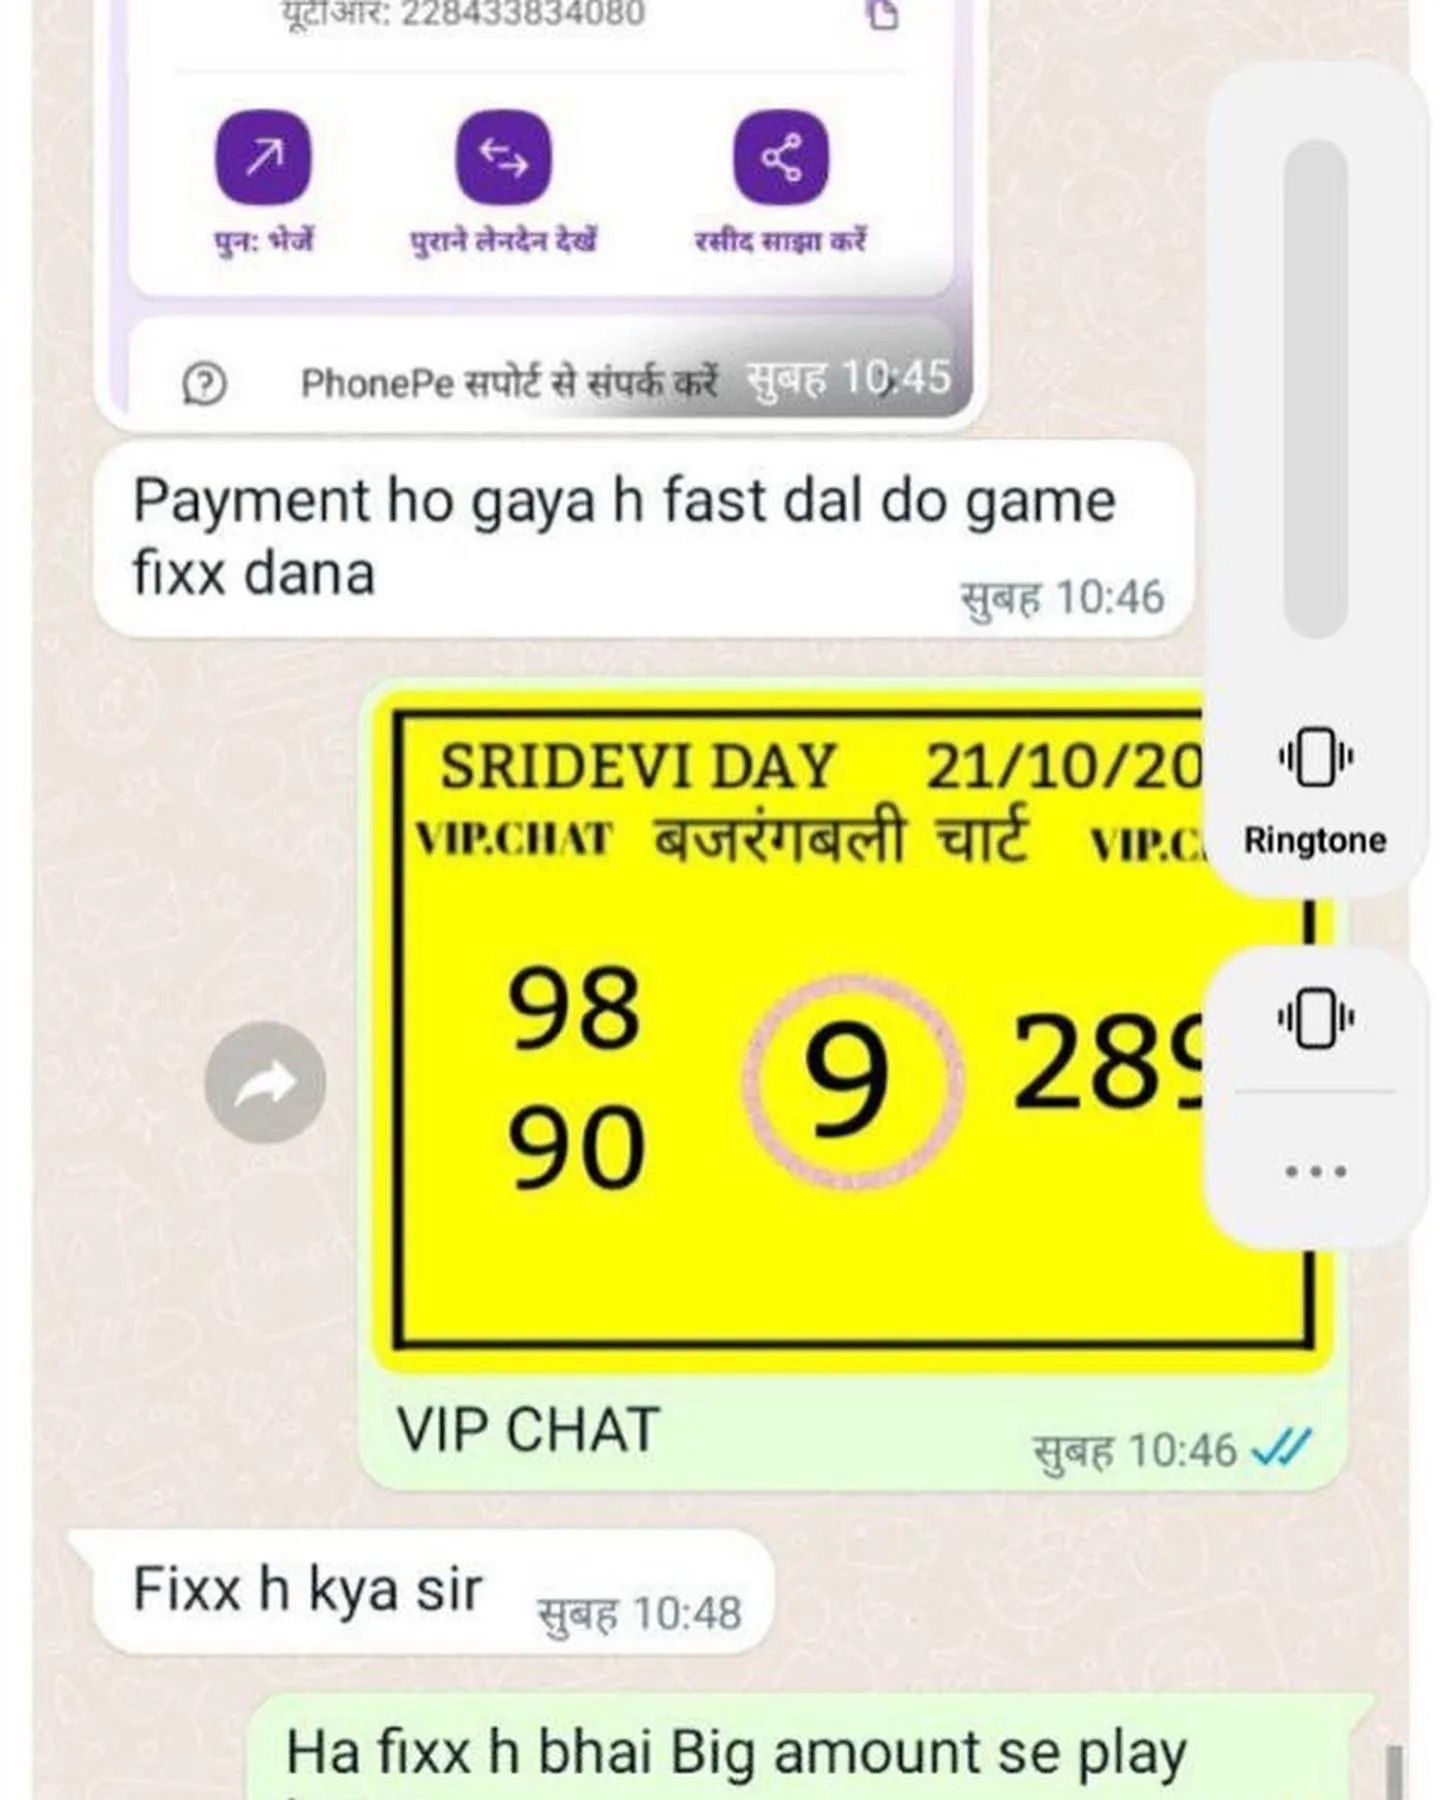 mh matka online play app Images • MH Games (@1190042263) on ShareChat